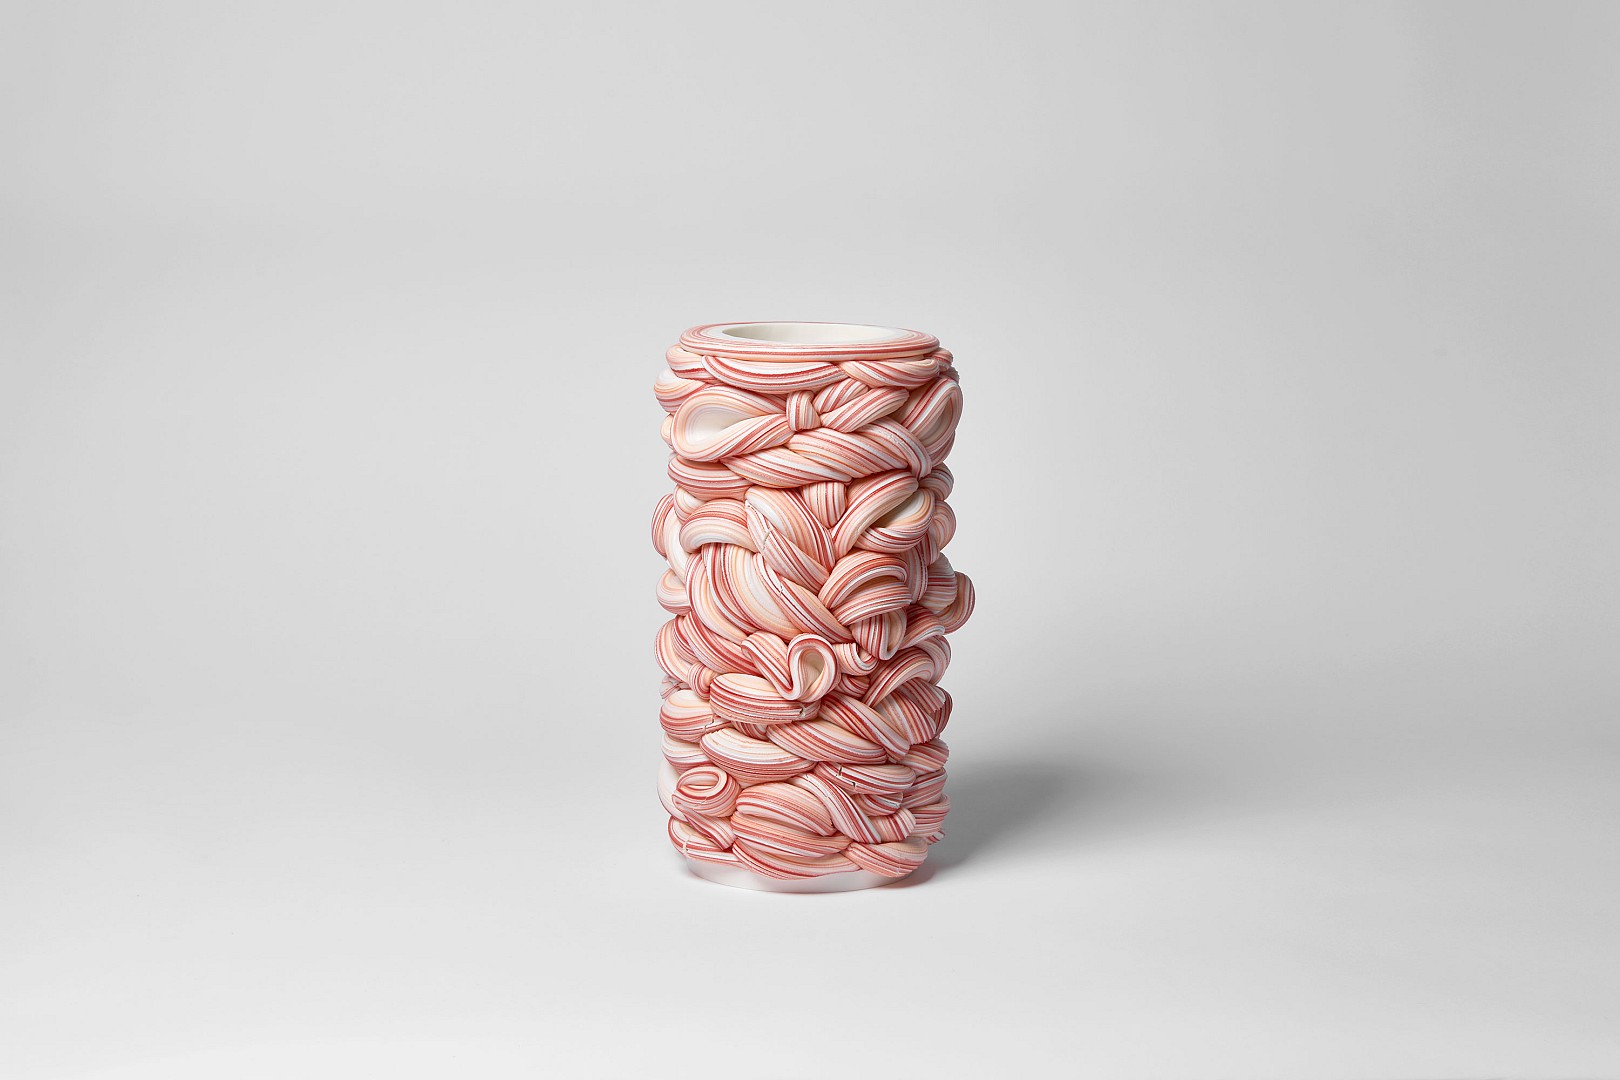 Steven Edwards exhibits a series of candy-like ceramic pieces in &lsquo;Infinite Folds&rsquo;